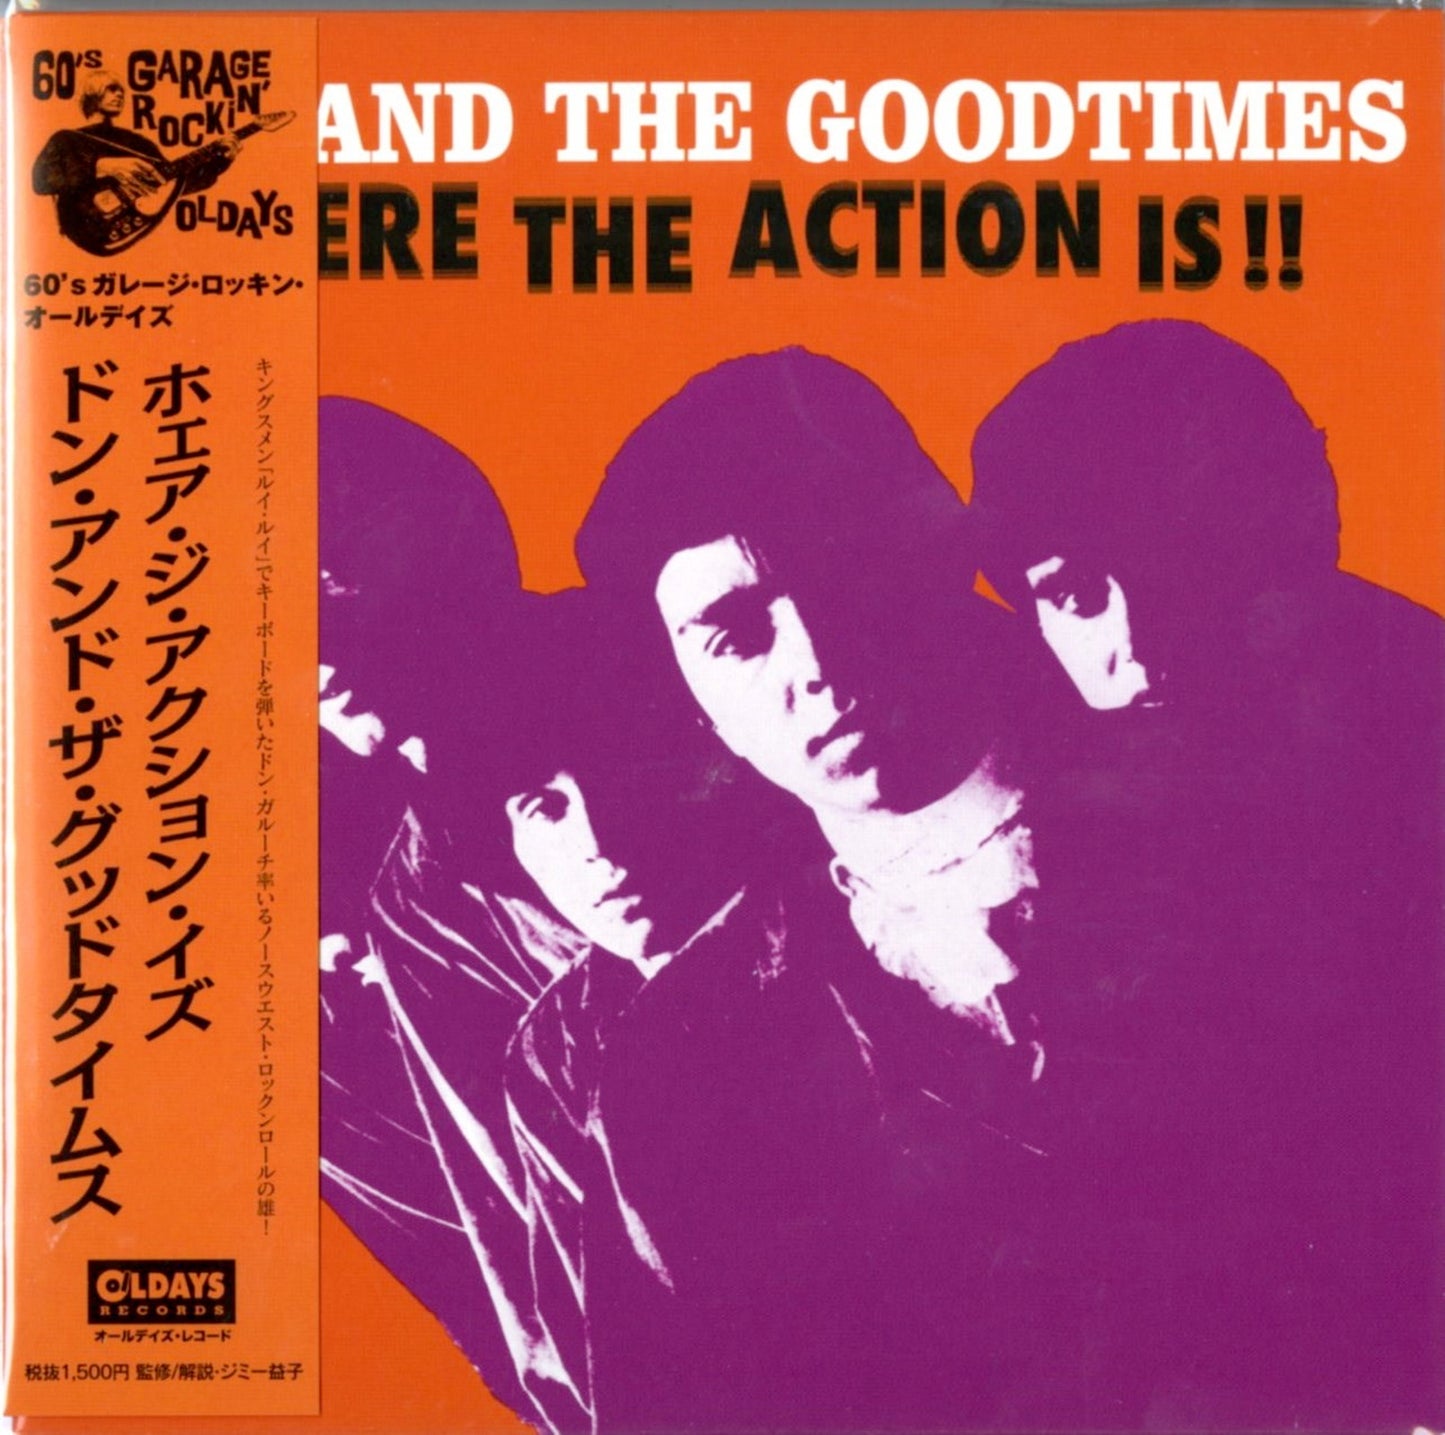 Don And The Goodtimes - Where The Action Is!! - Japan  Mini LP CD Bonus Track